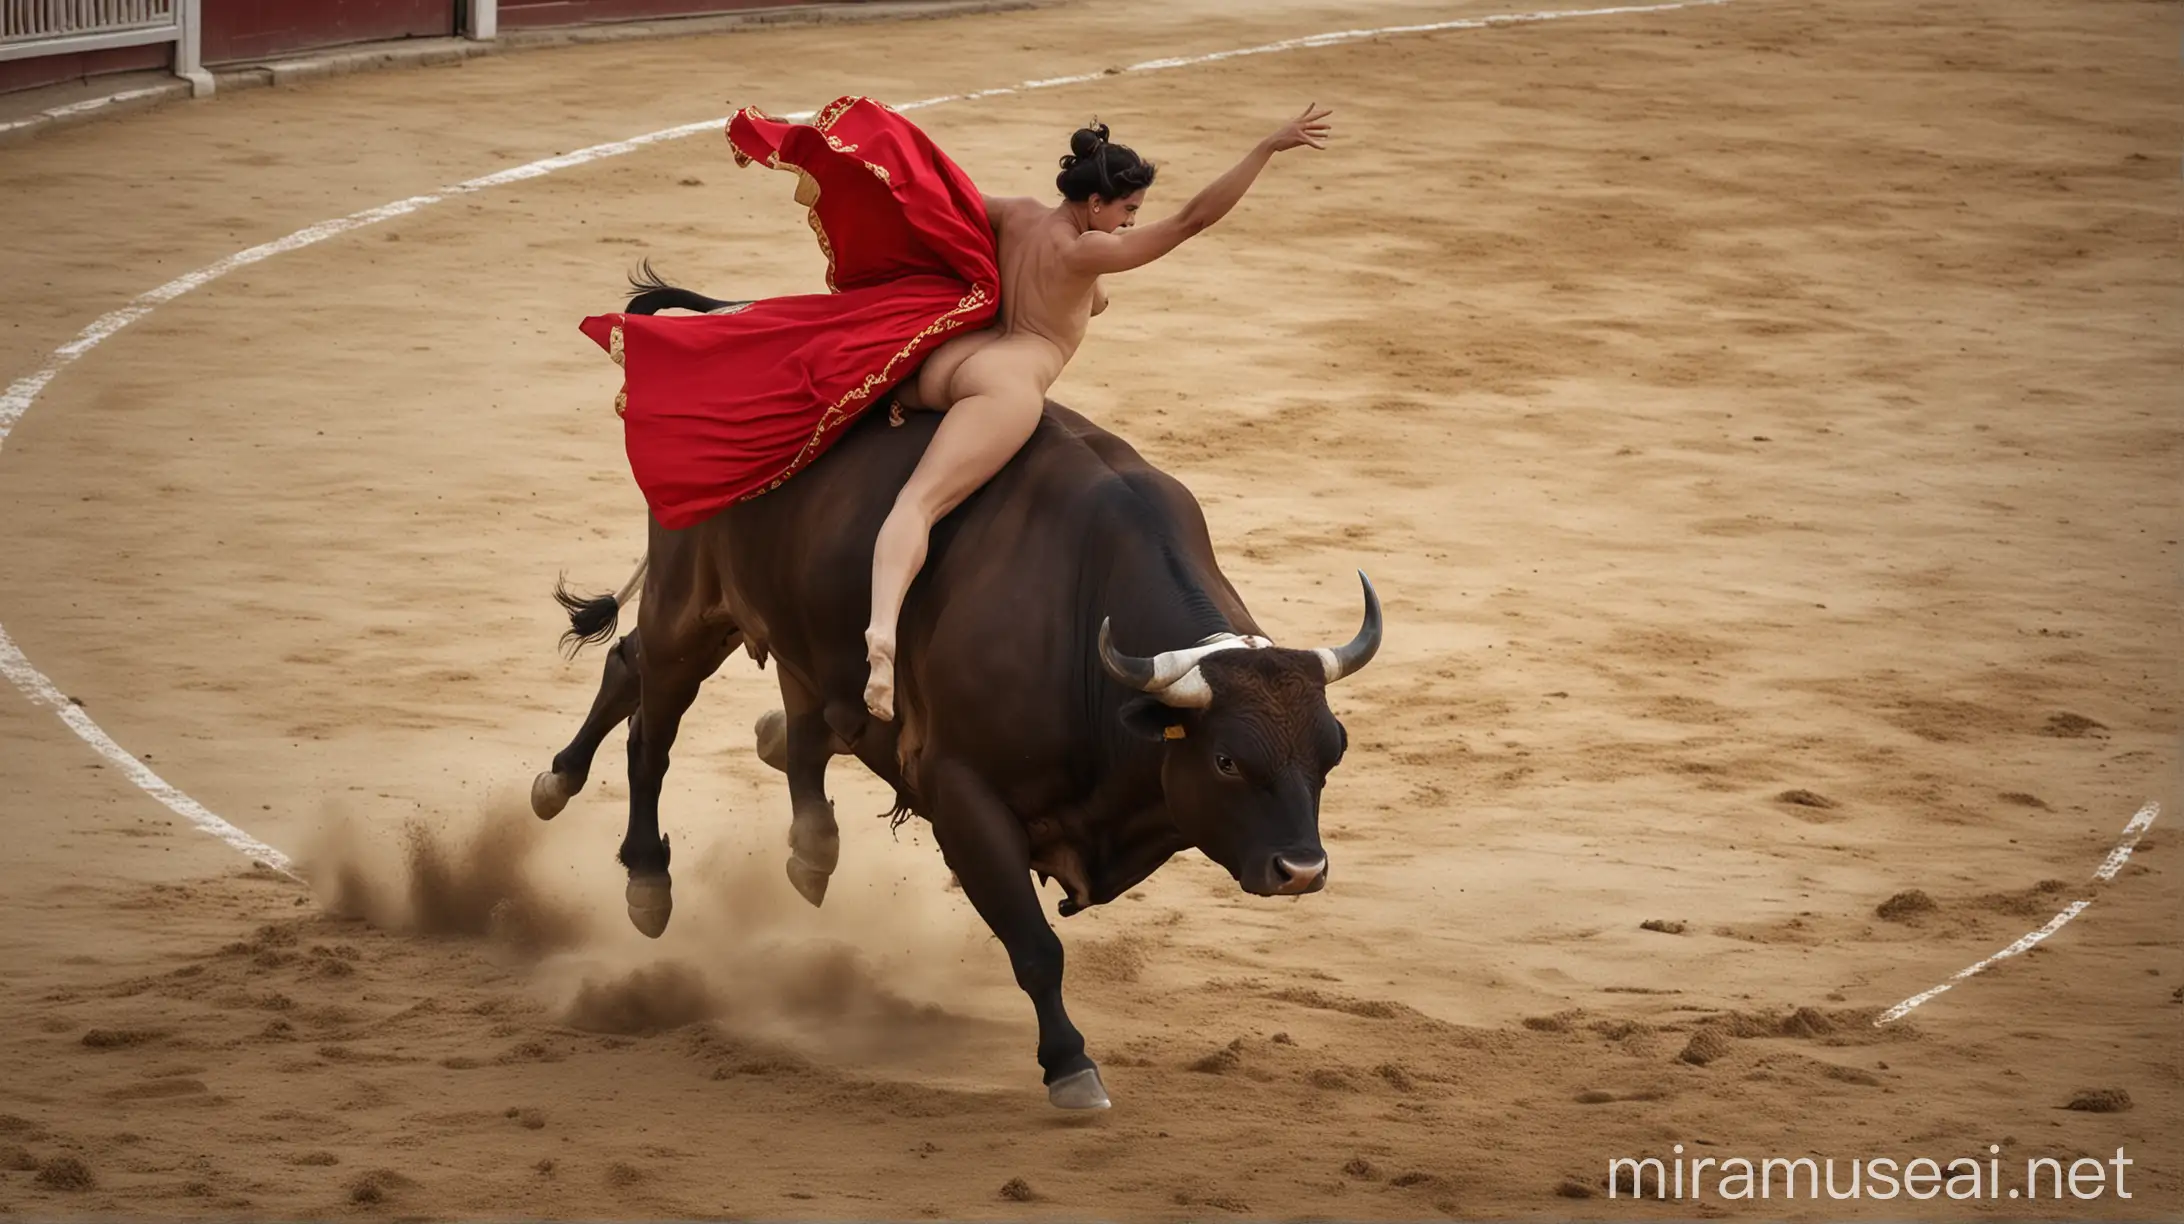 Nude Spanish bull fighter,in action,big bull,jump, realistic photography, award winning photography,proper fingers